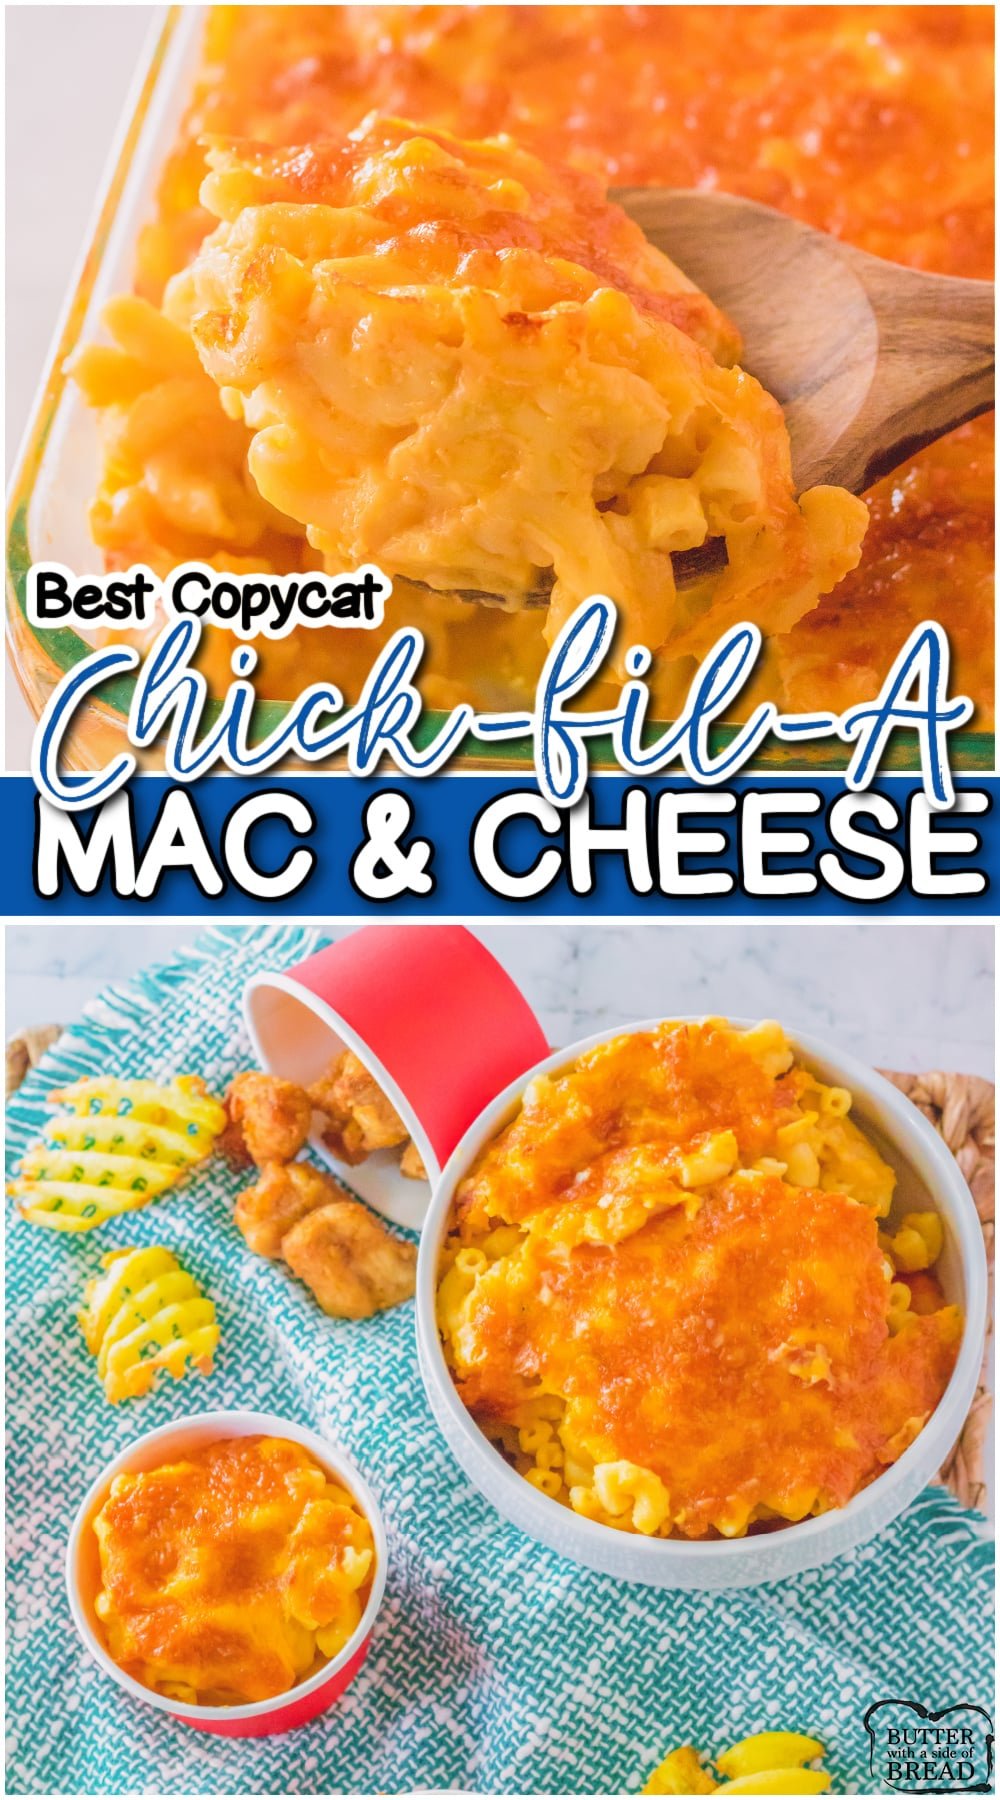 Copycat Chick-fil-A Mac and Cheese is super creamy & cheesy, just like the original! Easy macaroni and cheese recipe made at home with common ingredients. It's our pleasure! 